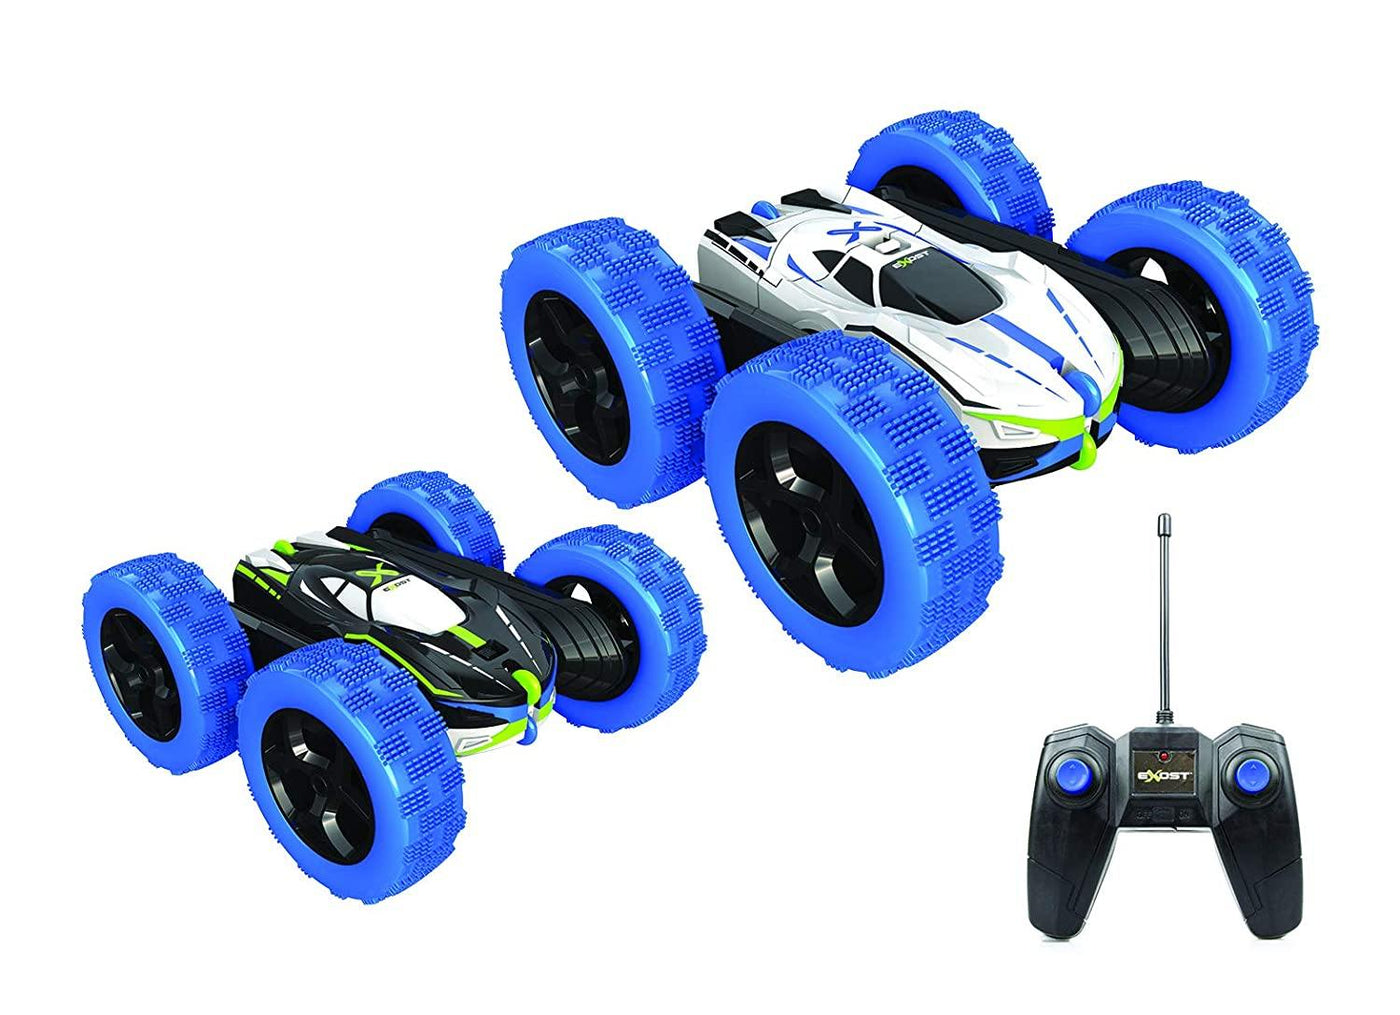 Exost Storm RC Car! (Perform On 2 Faces); Scale: 1:18; Speed: 8 km/h - Krazy Caterpillar 